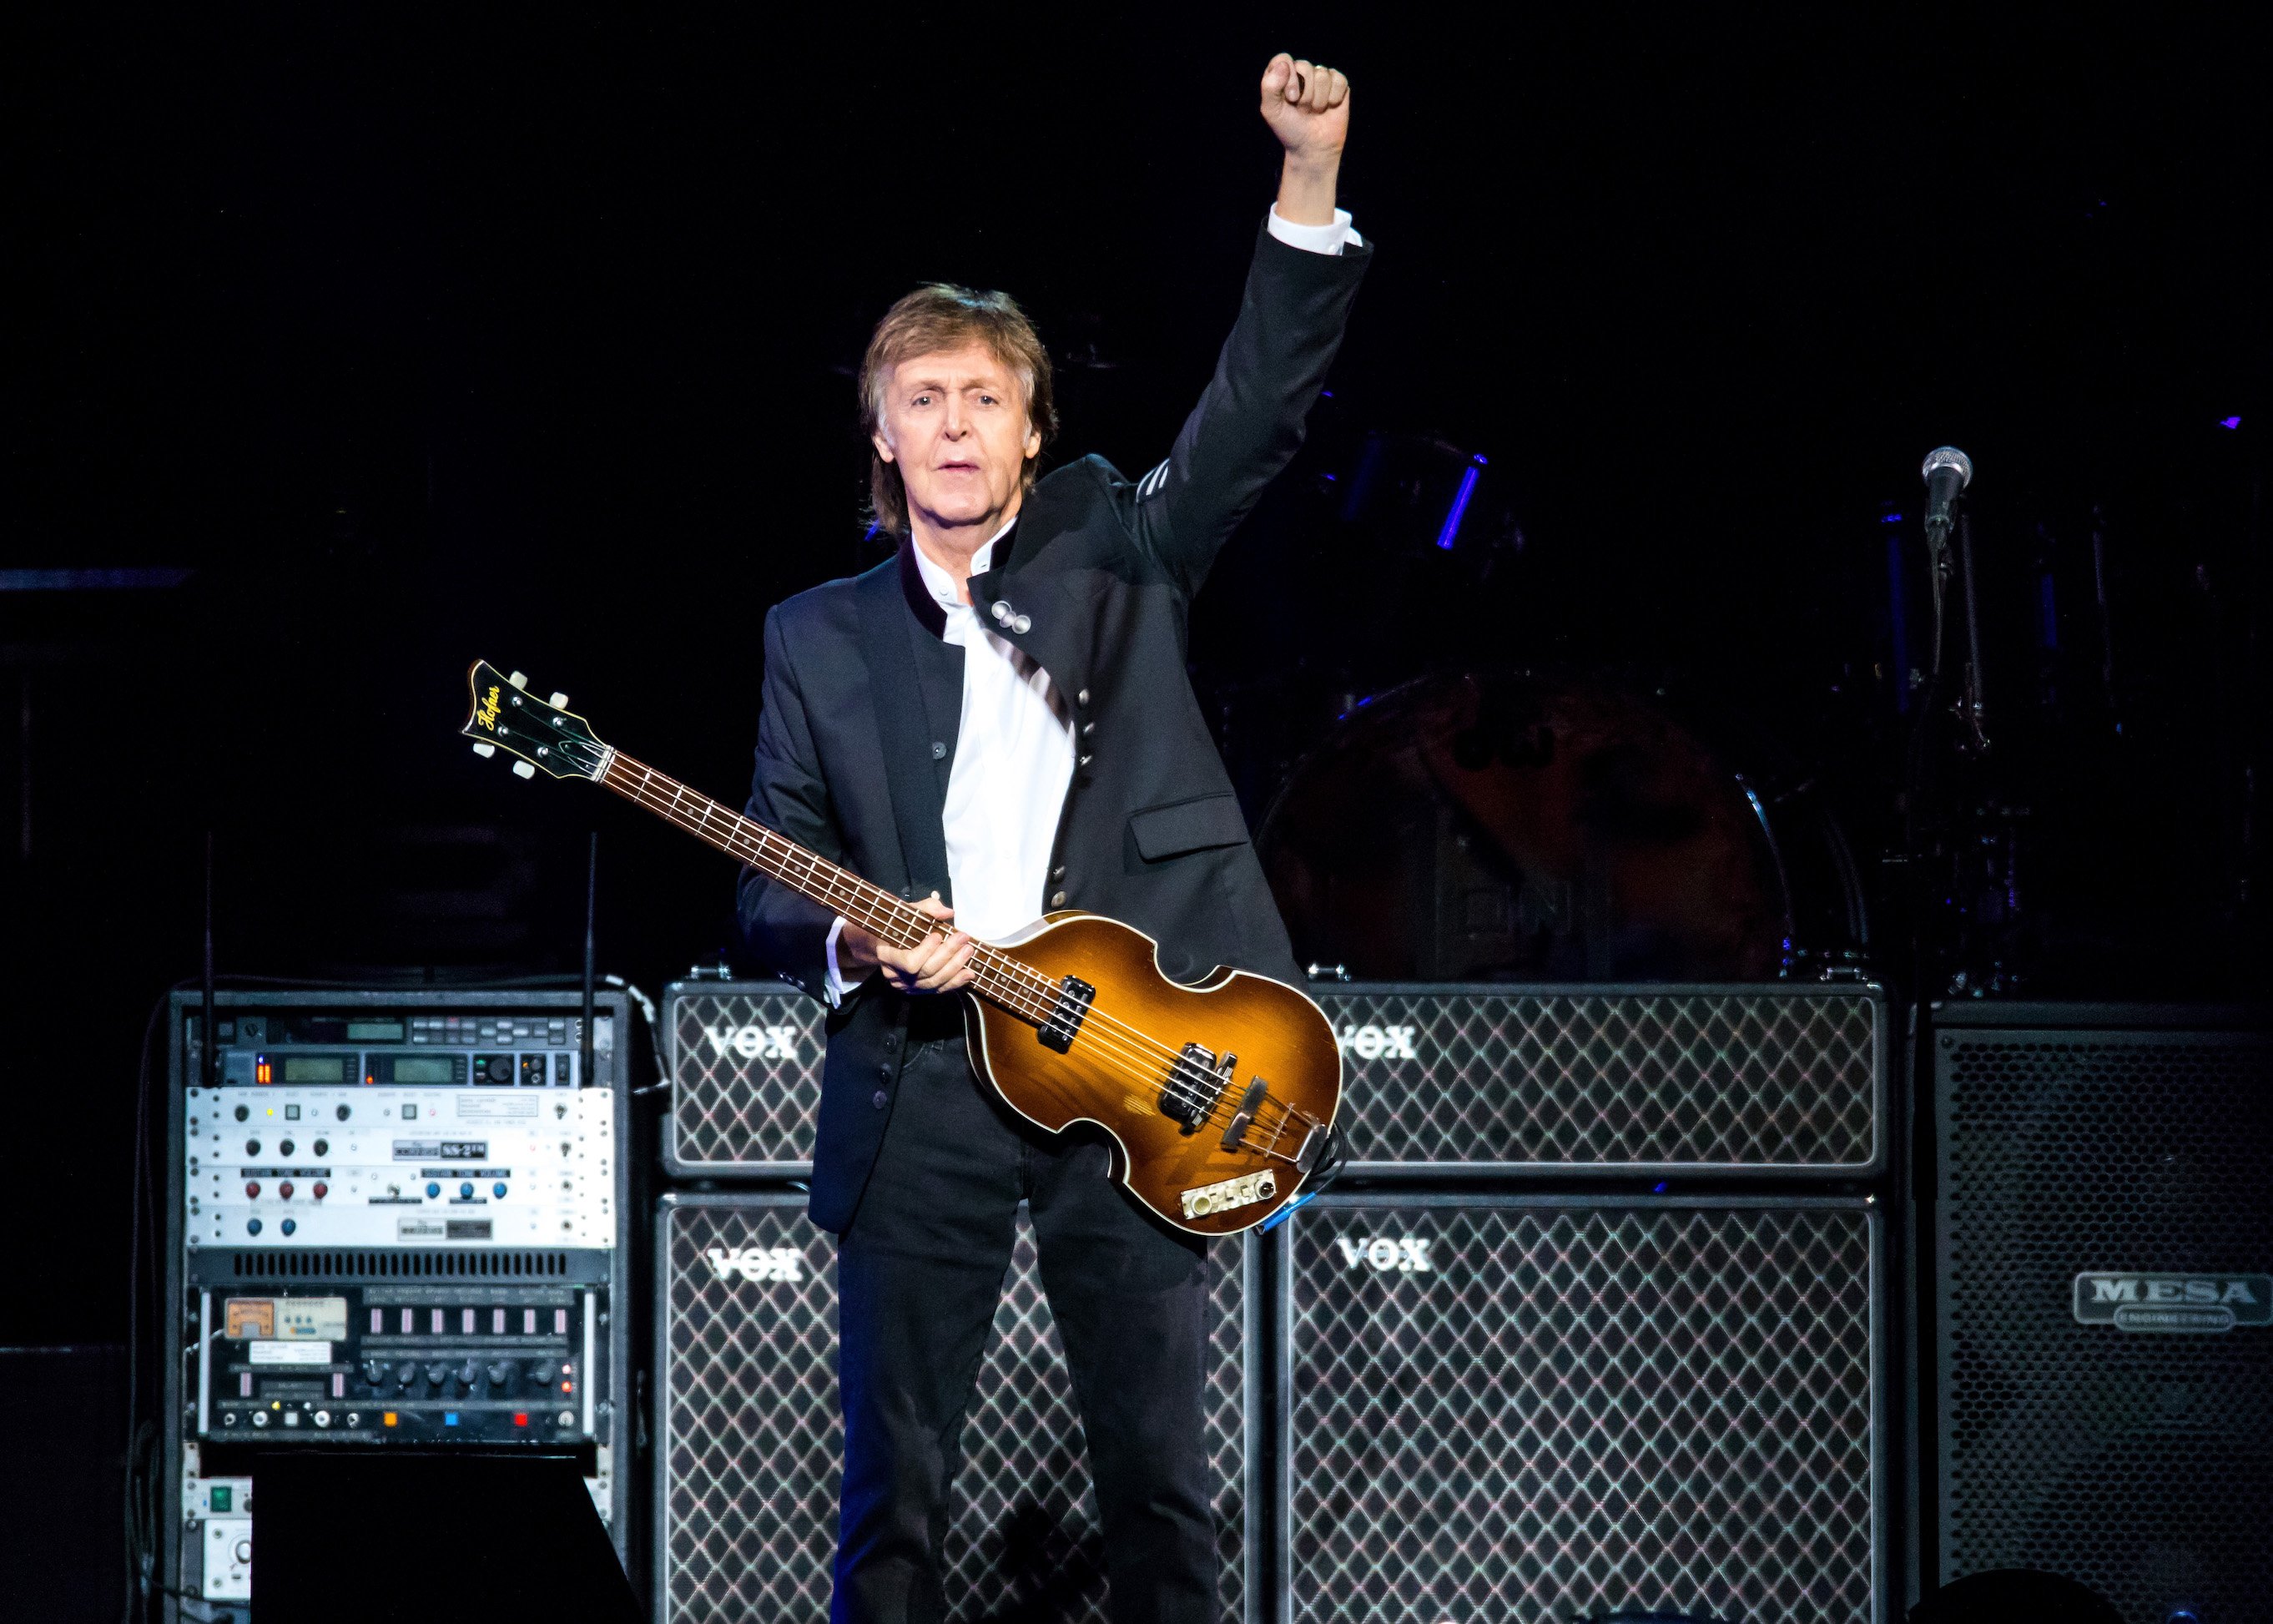 Paul McCartney performs during his One one Tour at Little Caesars Arena in Detroit, Michigan